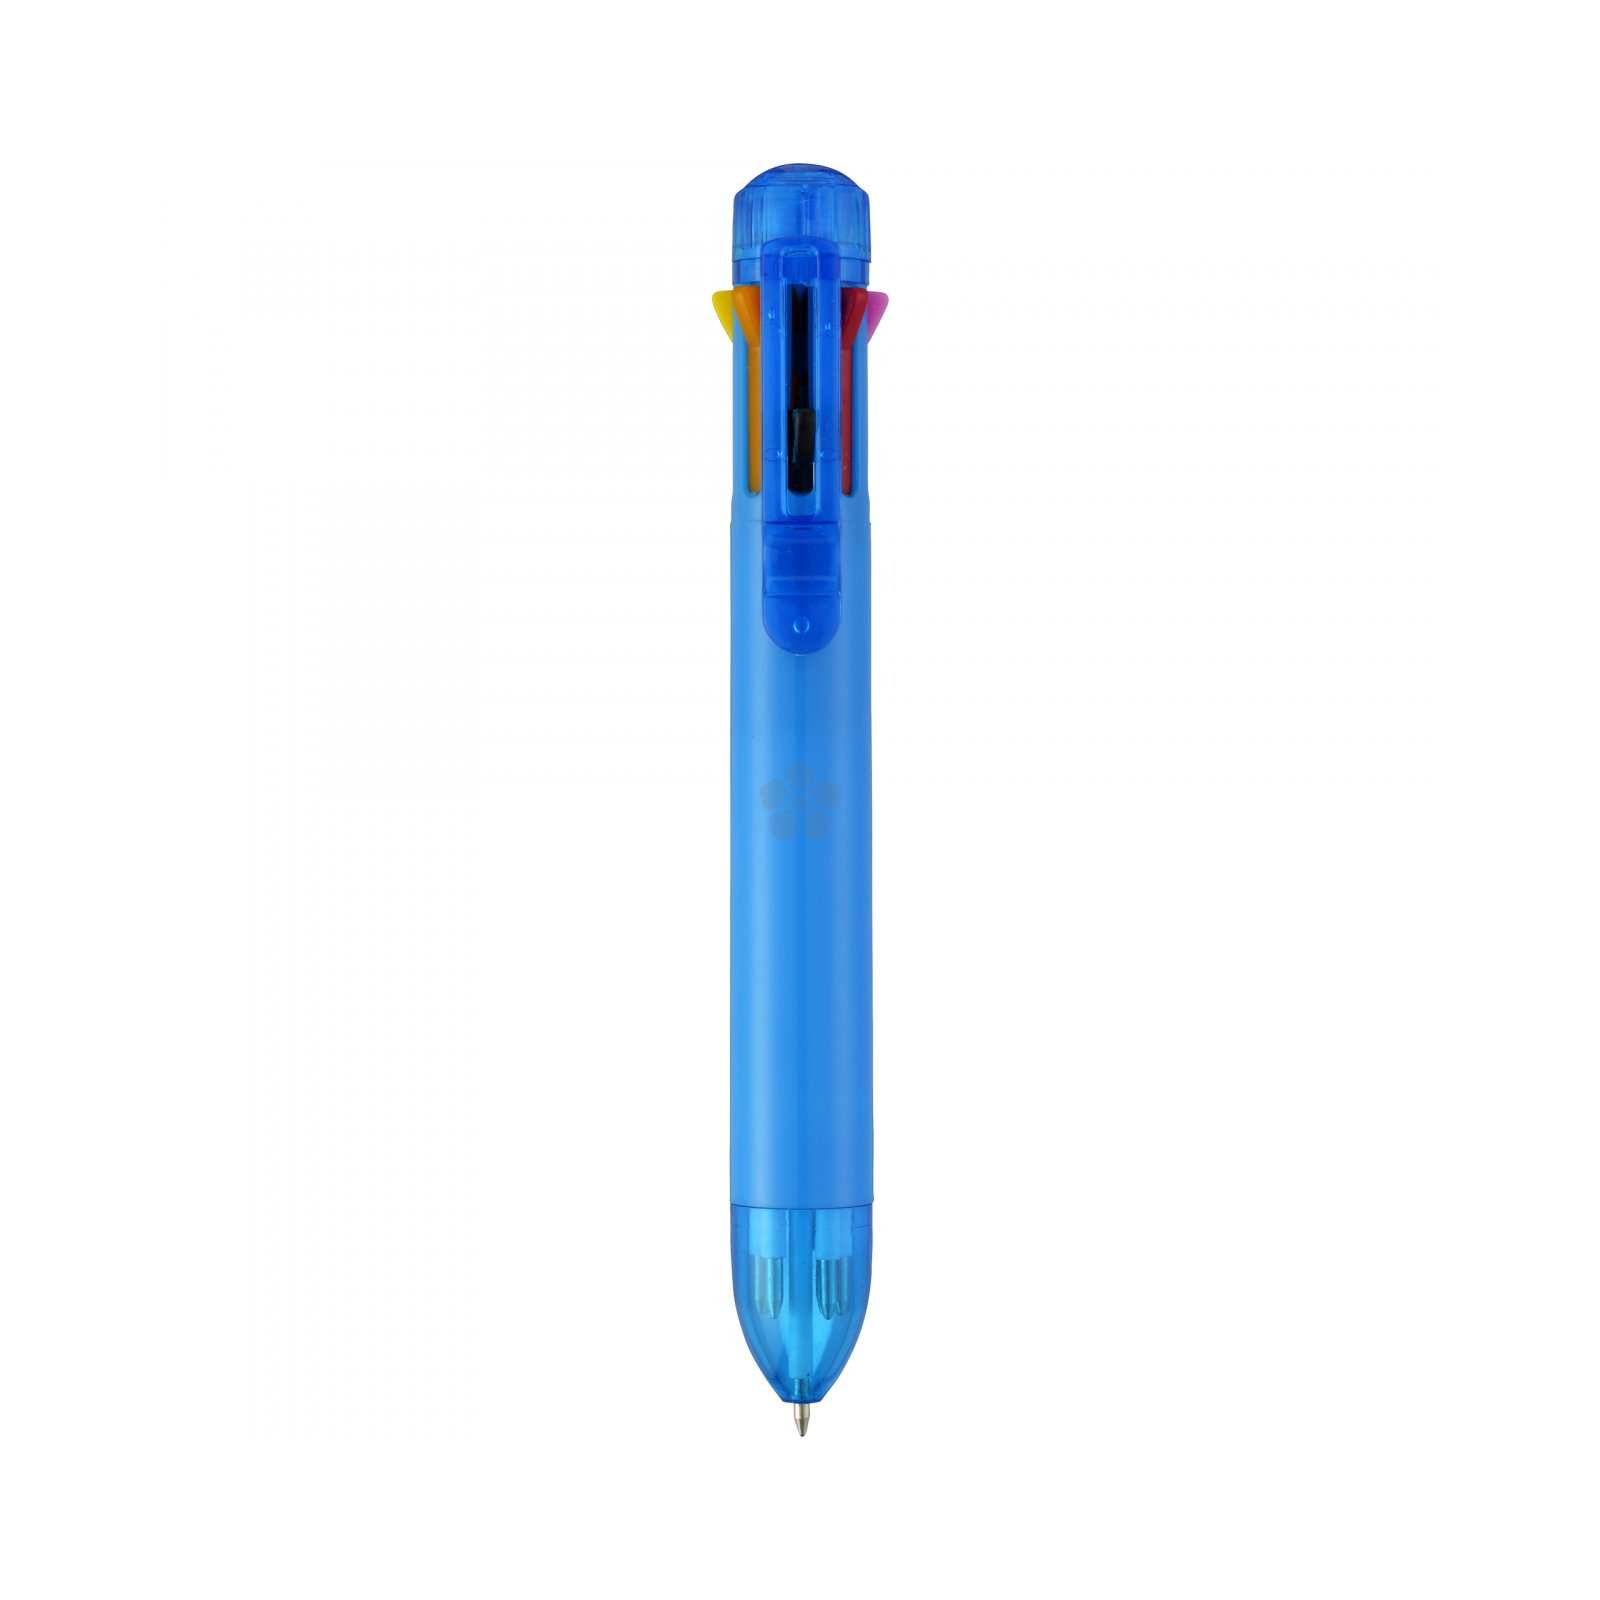 Promotional 8 Colour Pen, Personalised by MoJo Promotions